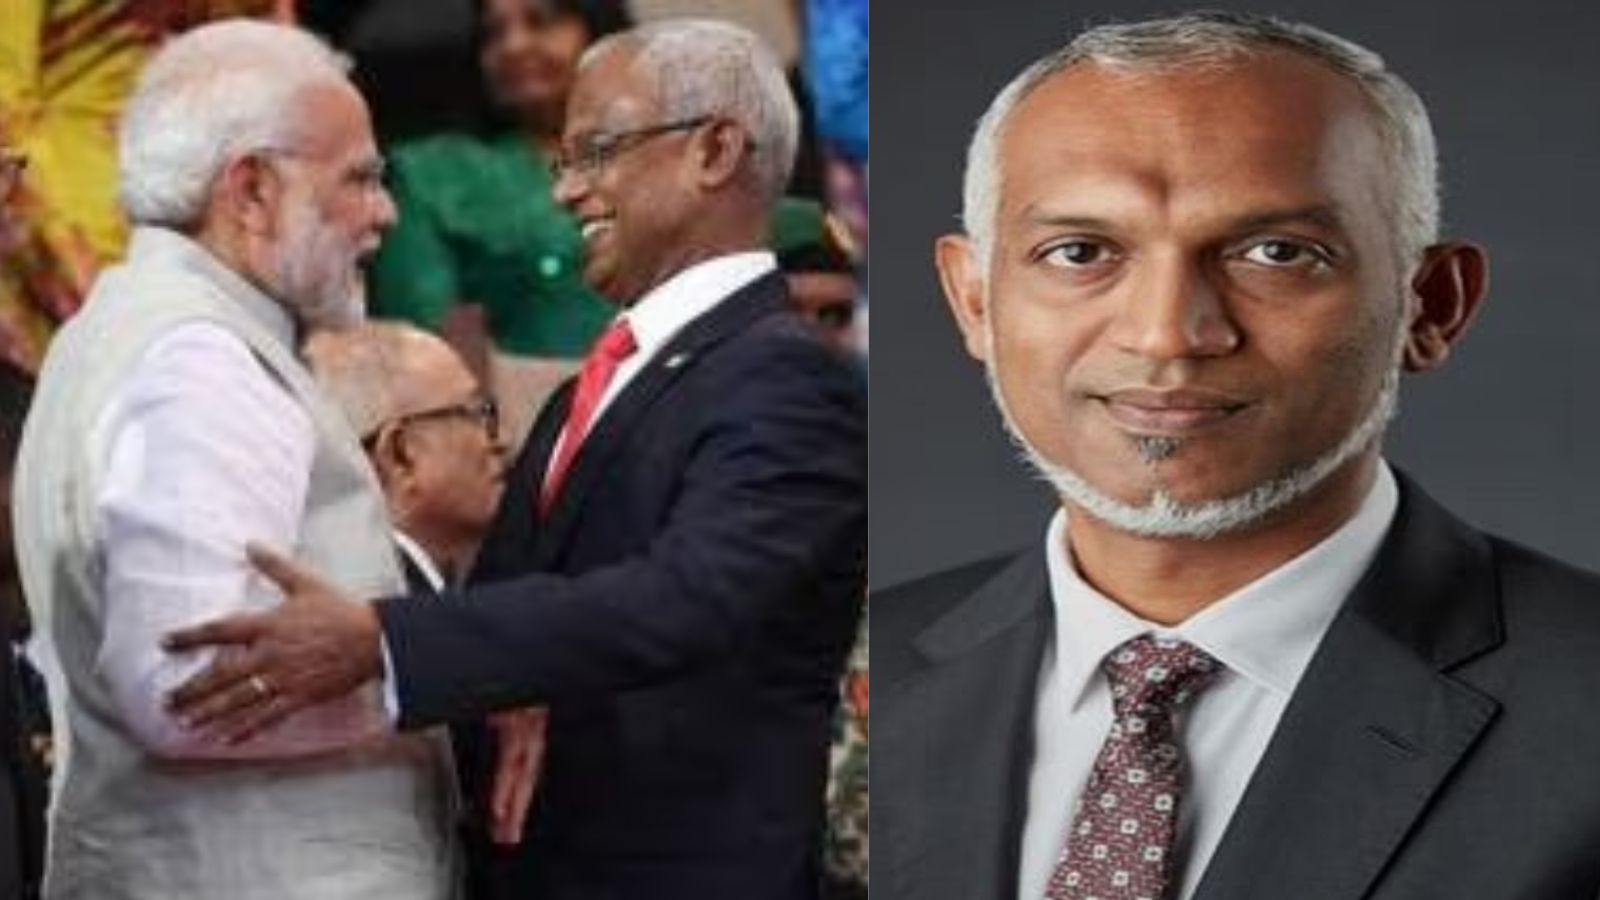 The financial challenges are not caused by Indian loans, former Maldives President Solih added. (File photos)